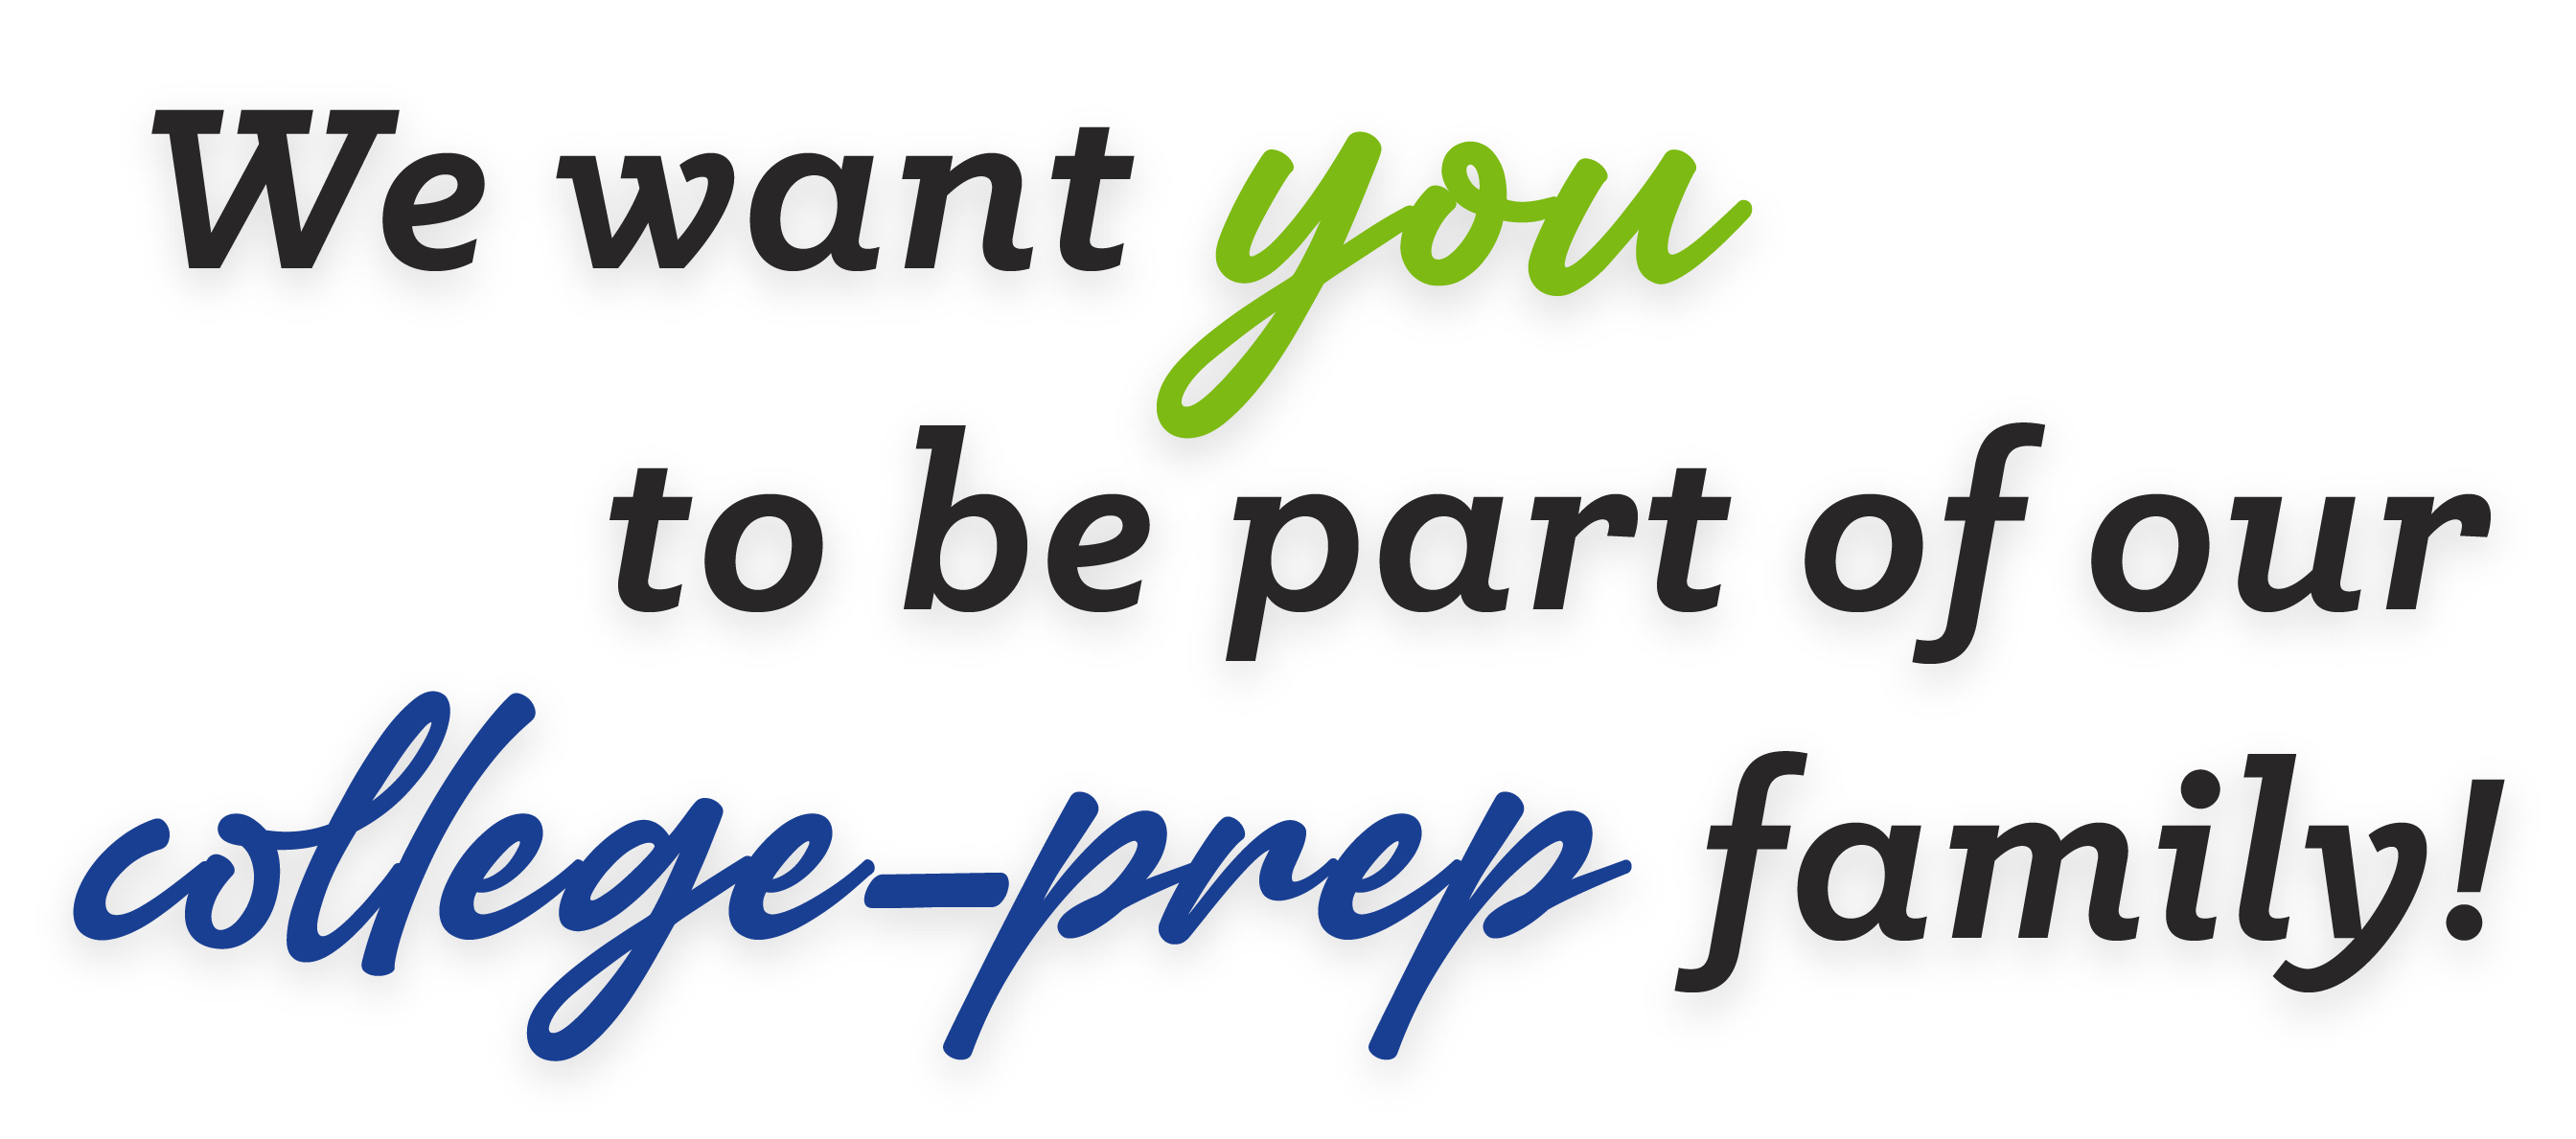 We want YOU to be part of our college-prep family!